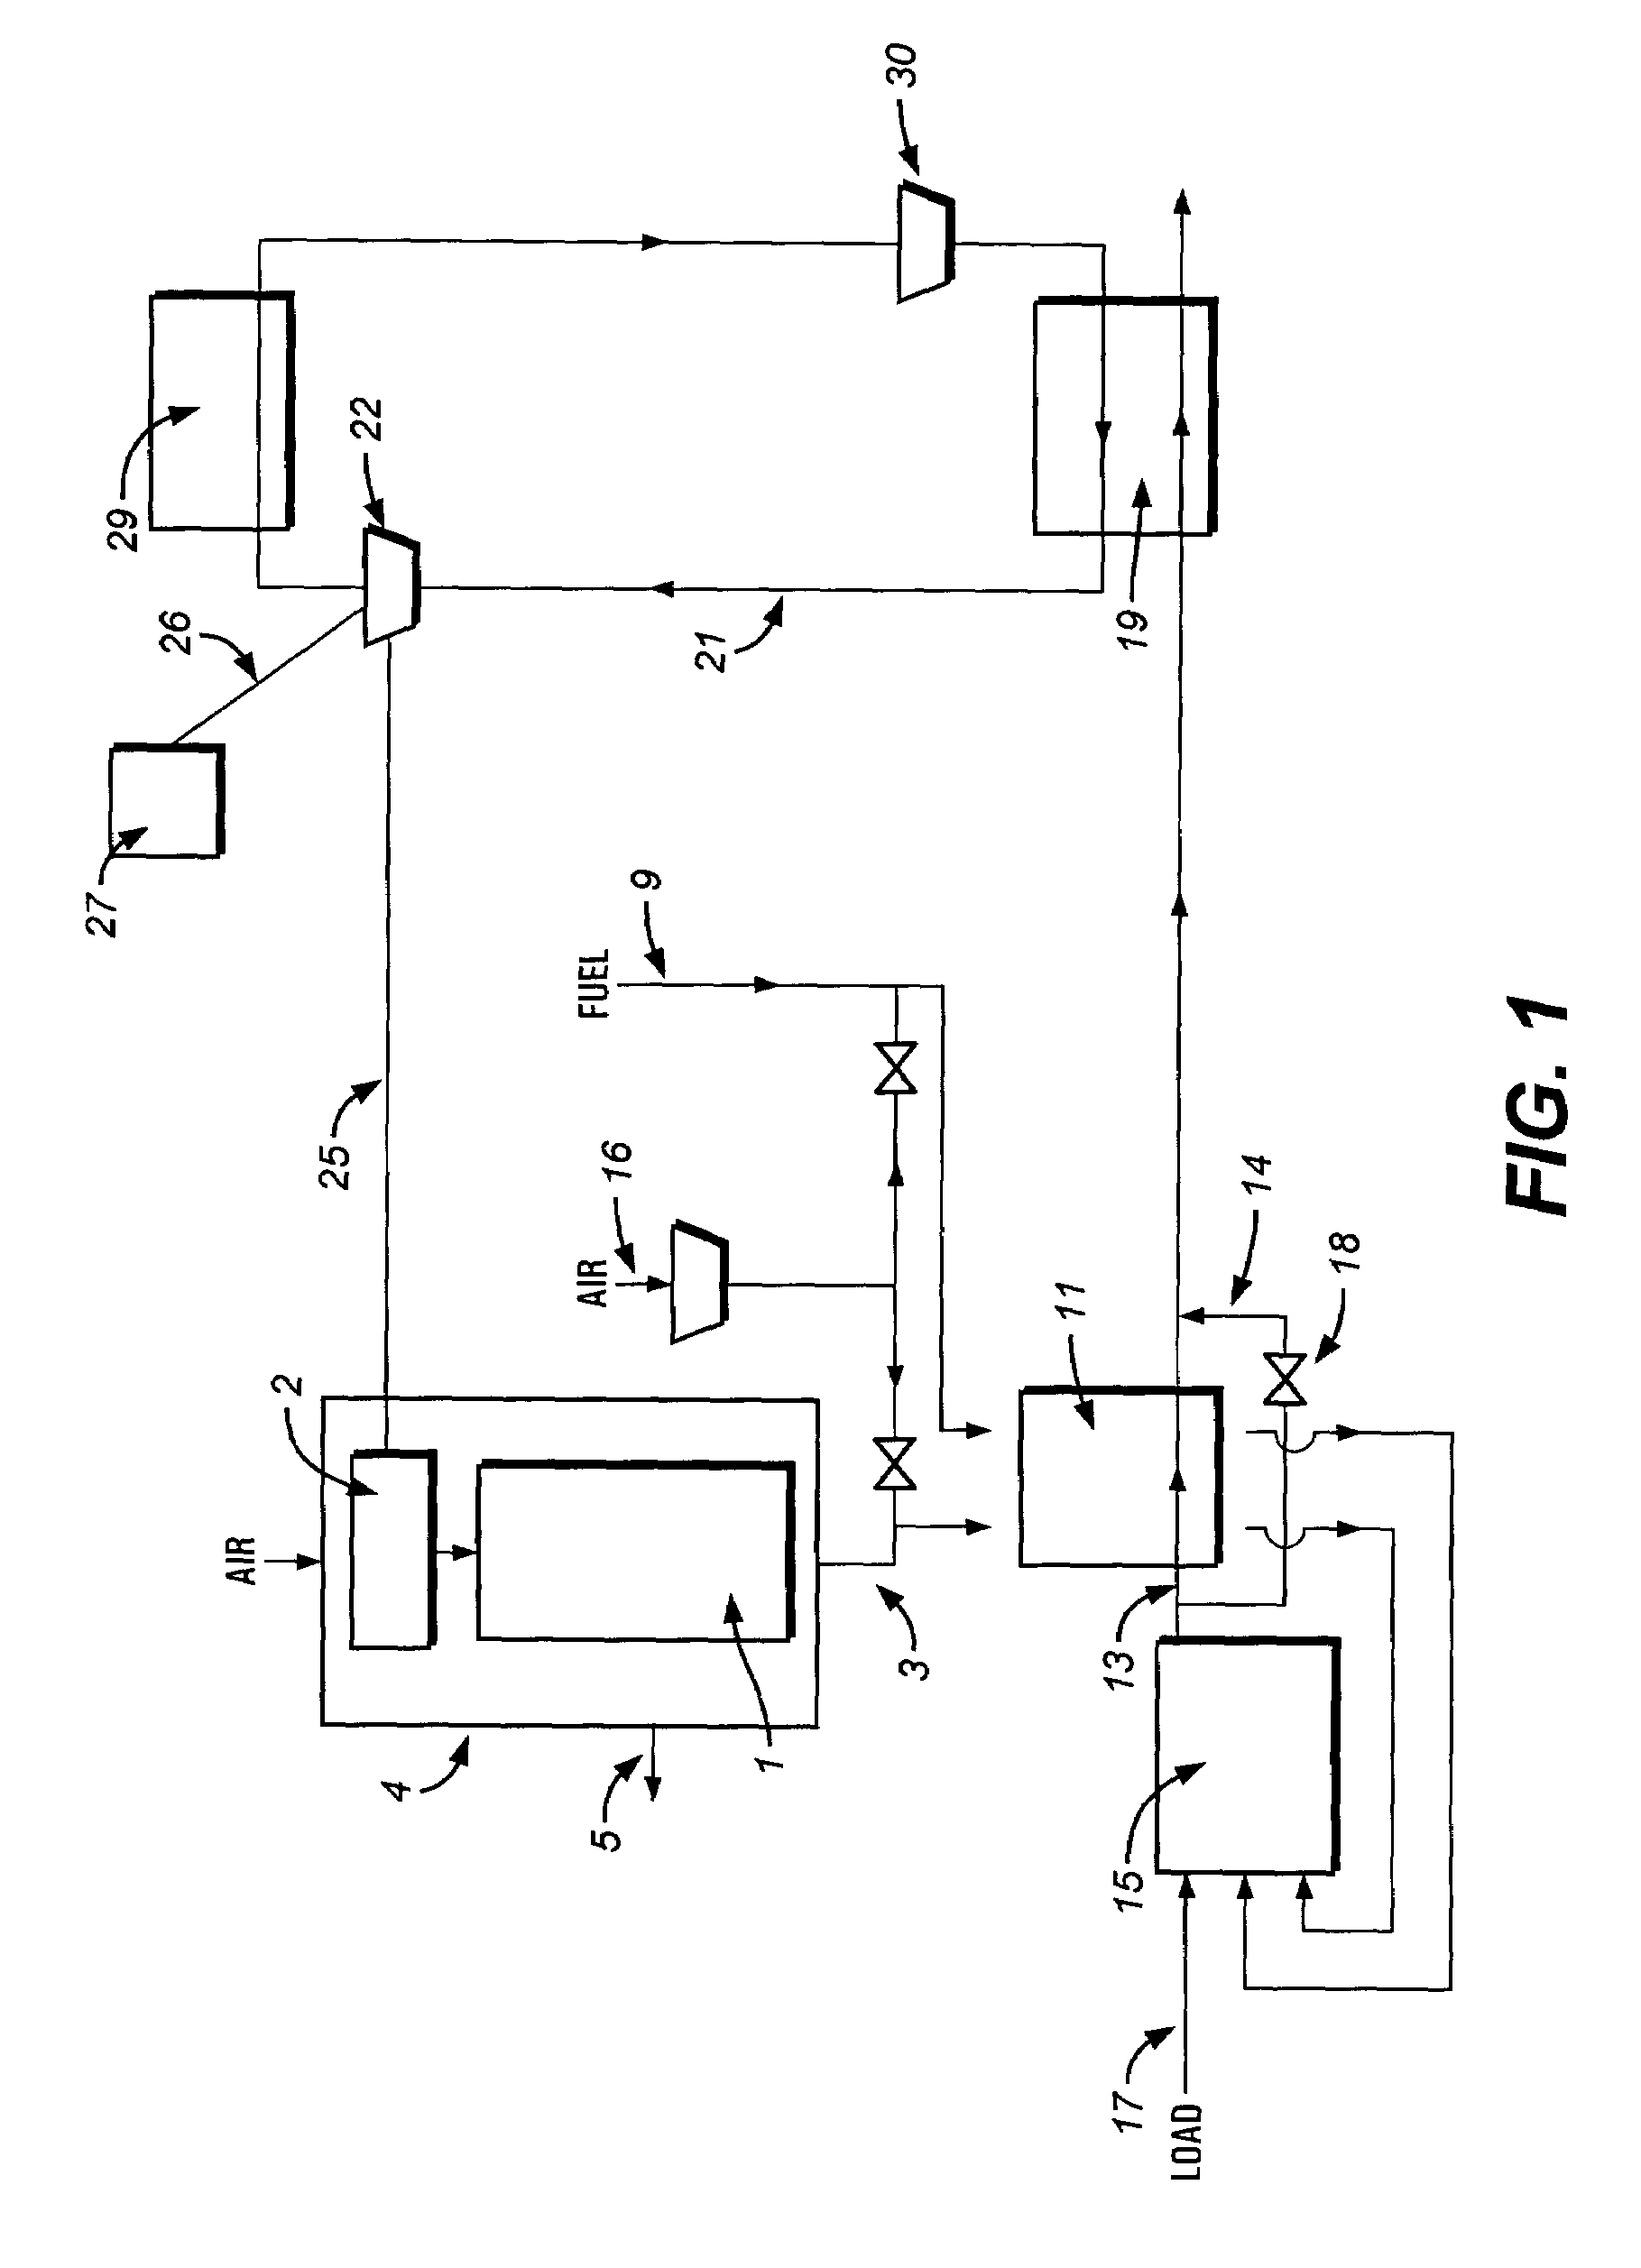 Integrated heat recovery systems and methods for increasing the efficiency of an oxygen-fired furnace